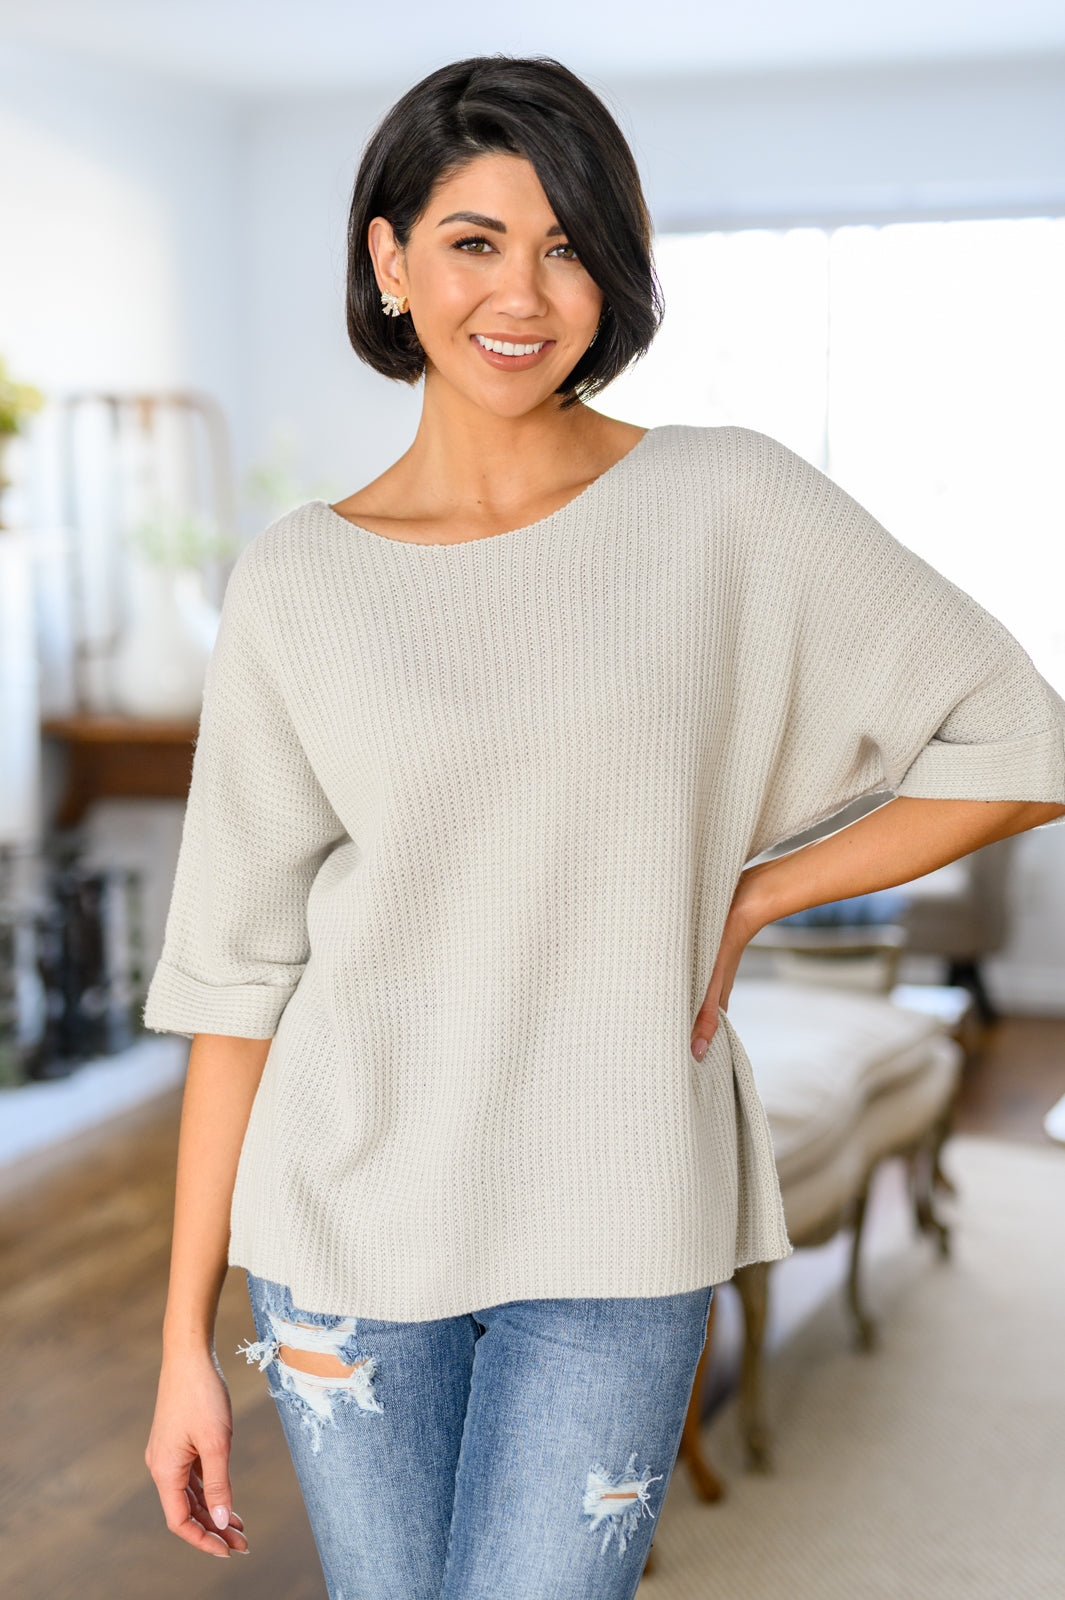 Lotta Love Knitted Sweater Top in Gray - 12/27/2022